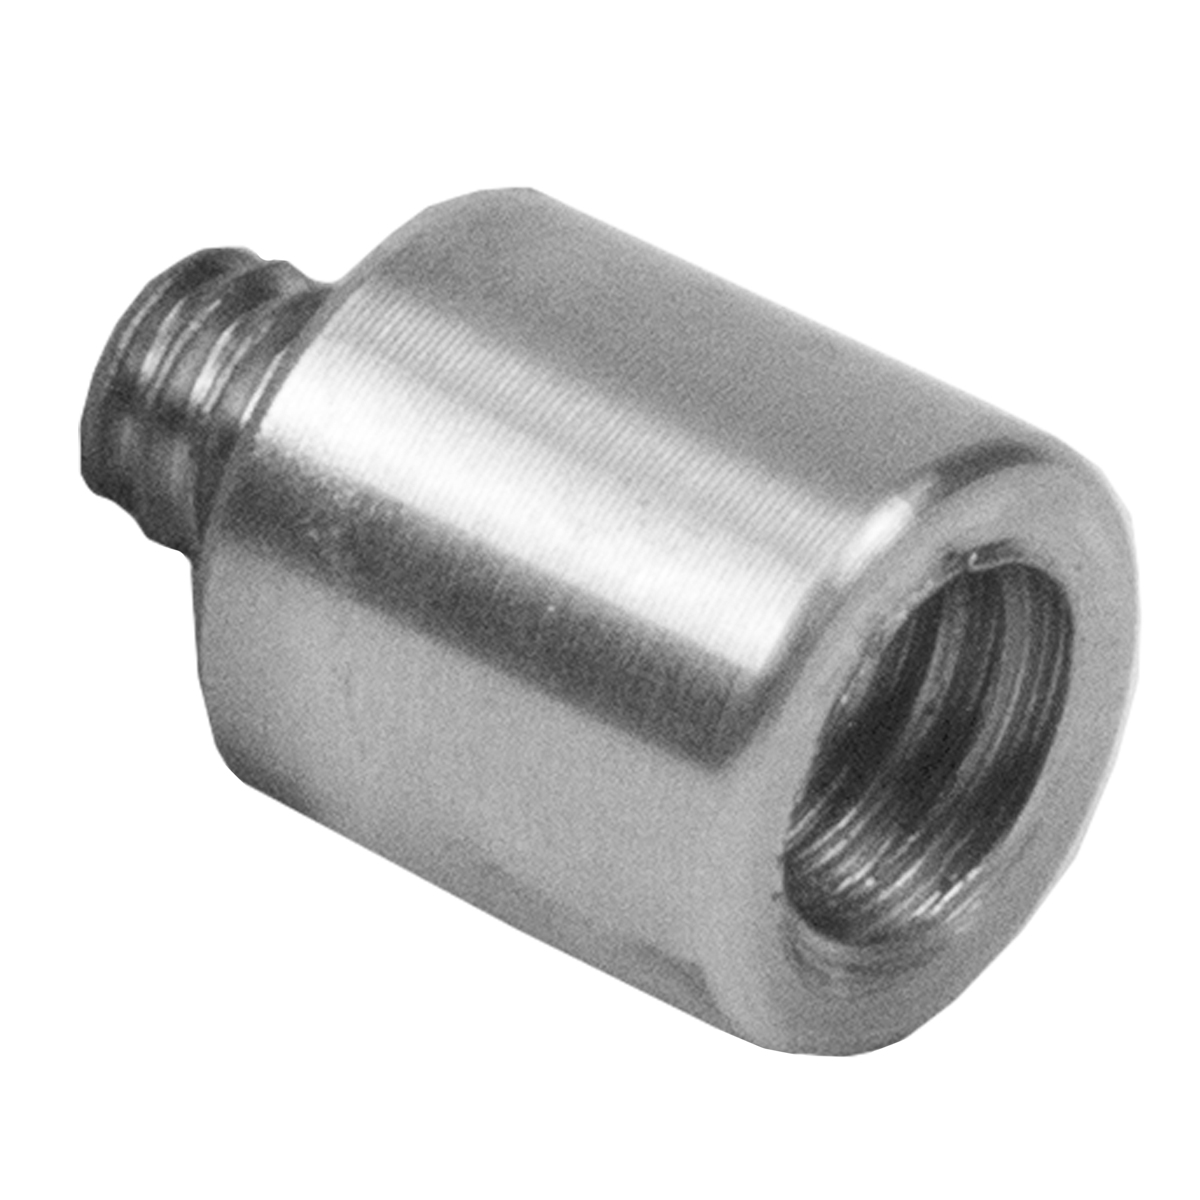 Flange Nut Mounting Adapter - Stainless Steel